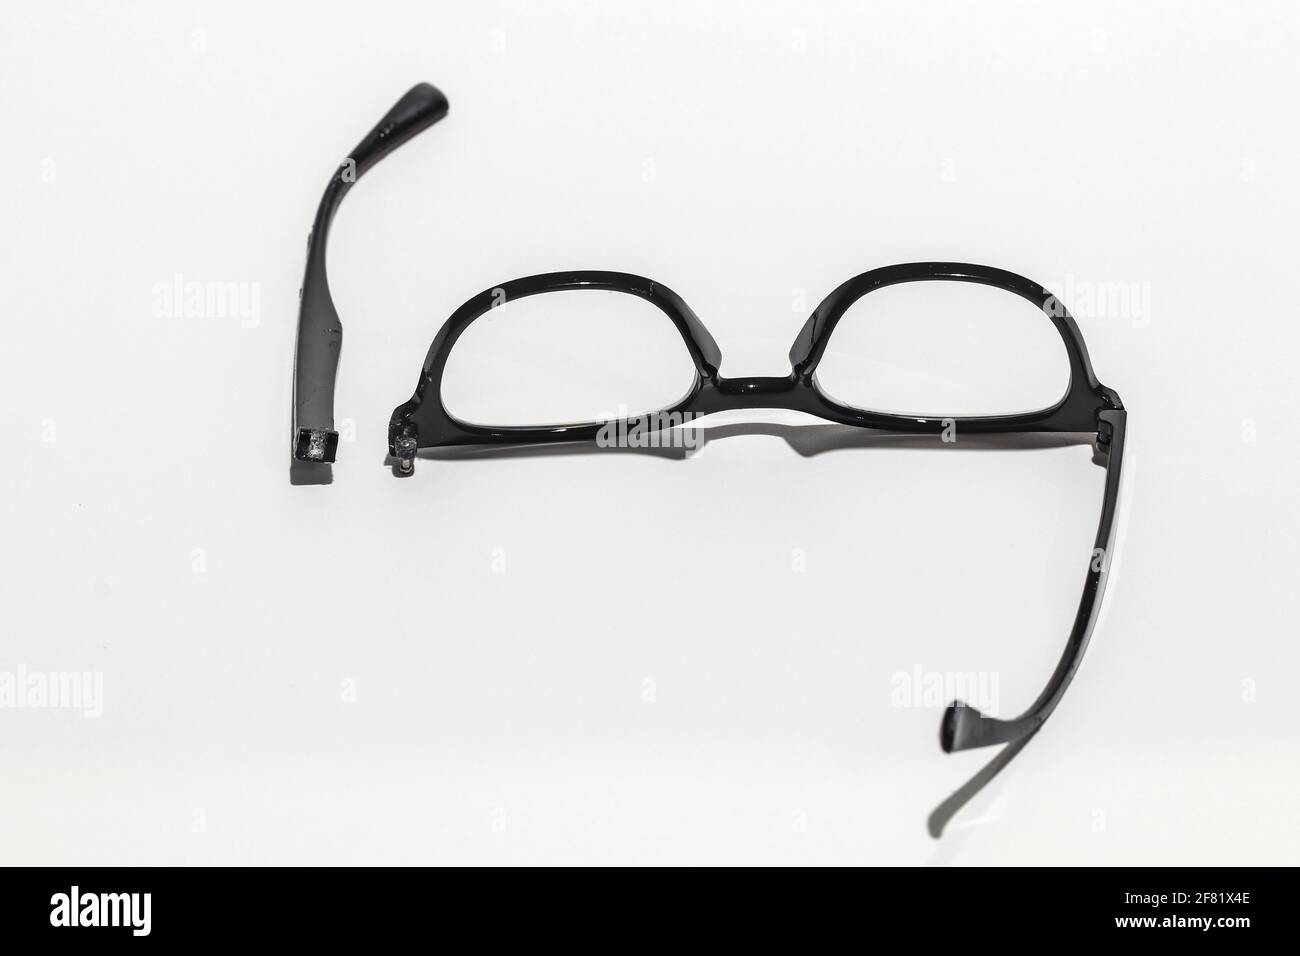 The glasses are damaged, the parts are separated. Focus on the legs of the glasses that have come off. Stock Photo